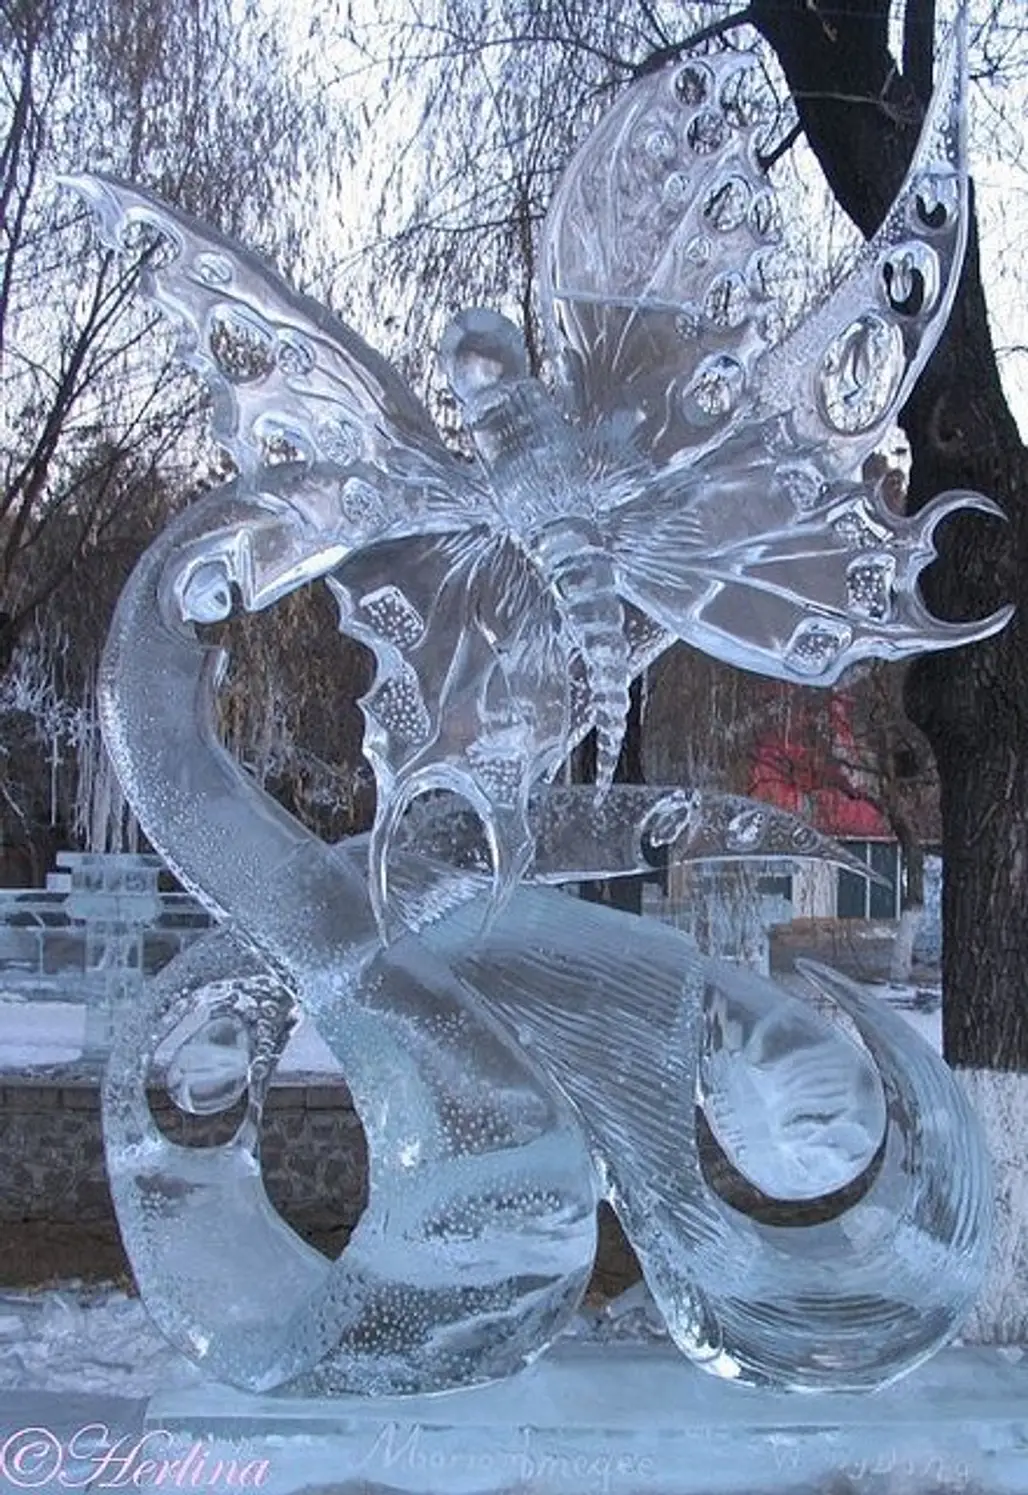 Ice Butterfly